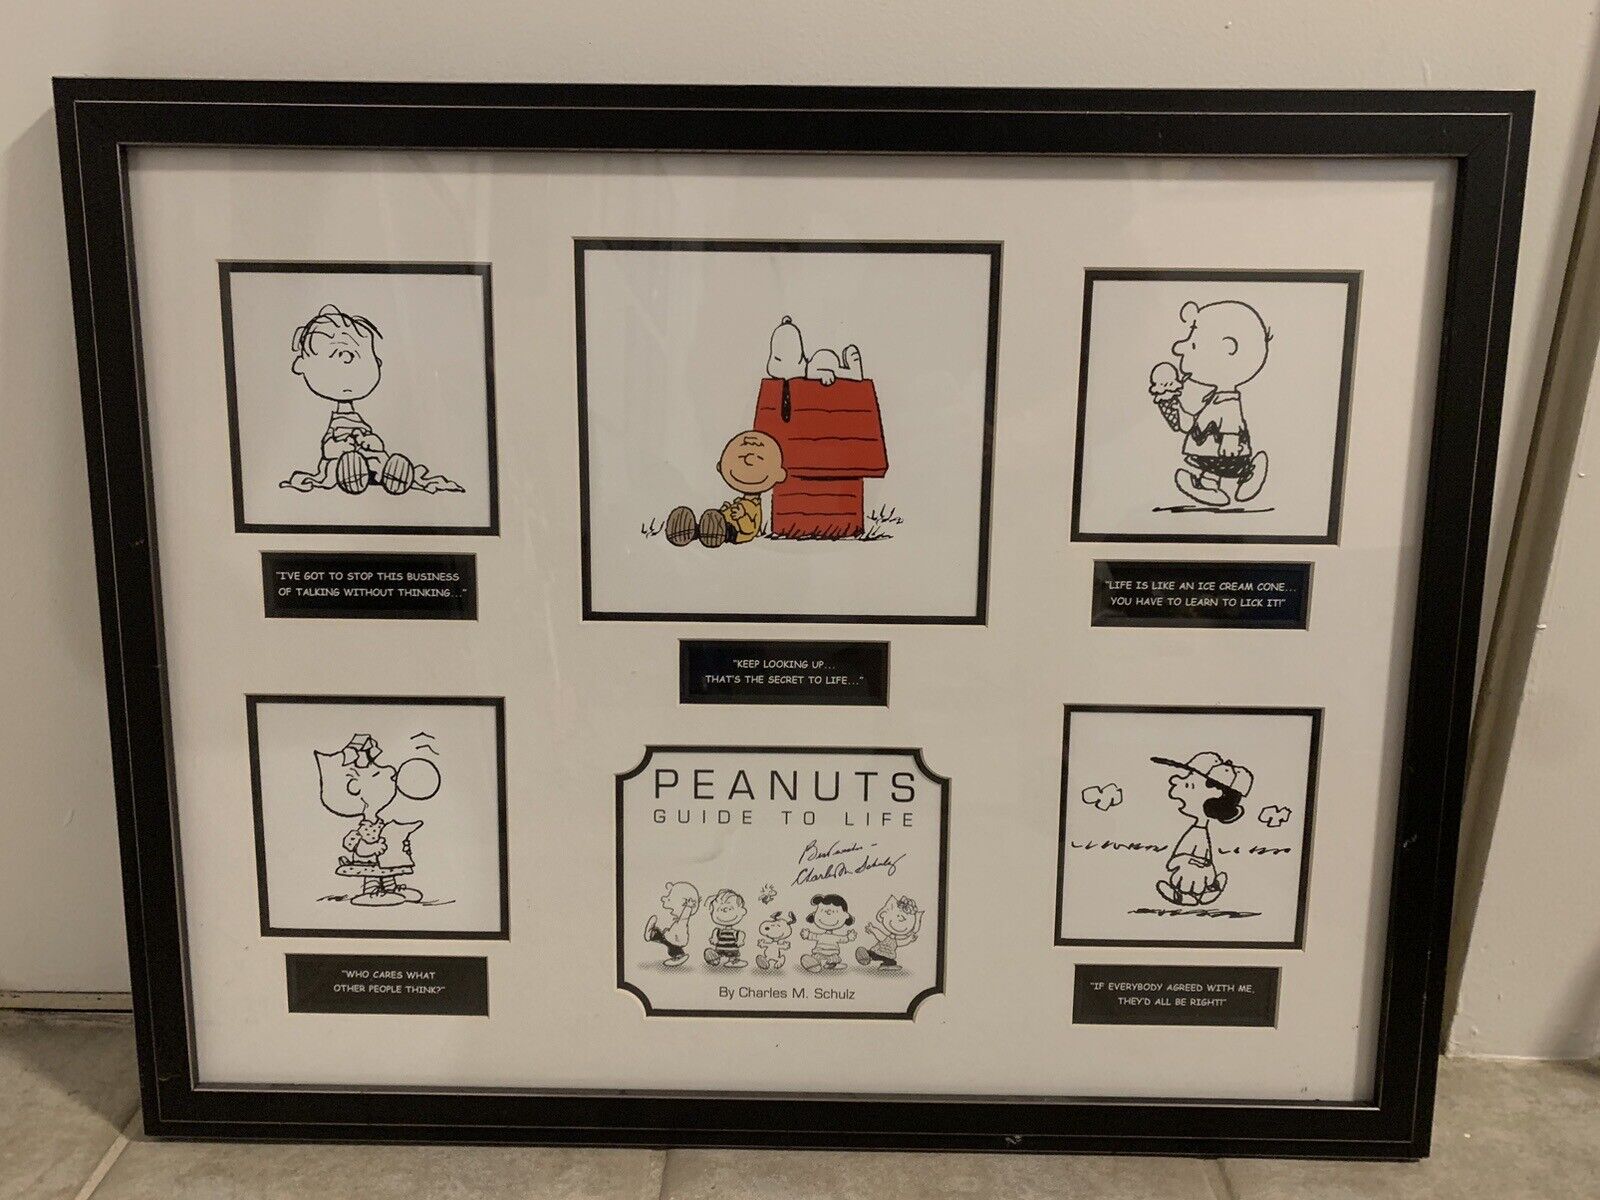 Charles Schulz “Peanuts Guide To Life” Framed Collage Rare w/ COA Charlie Brown